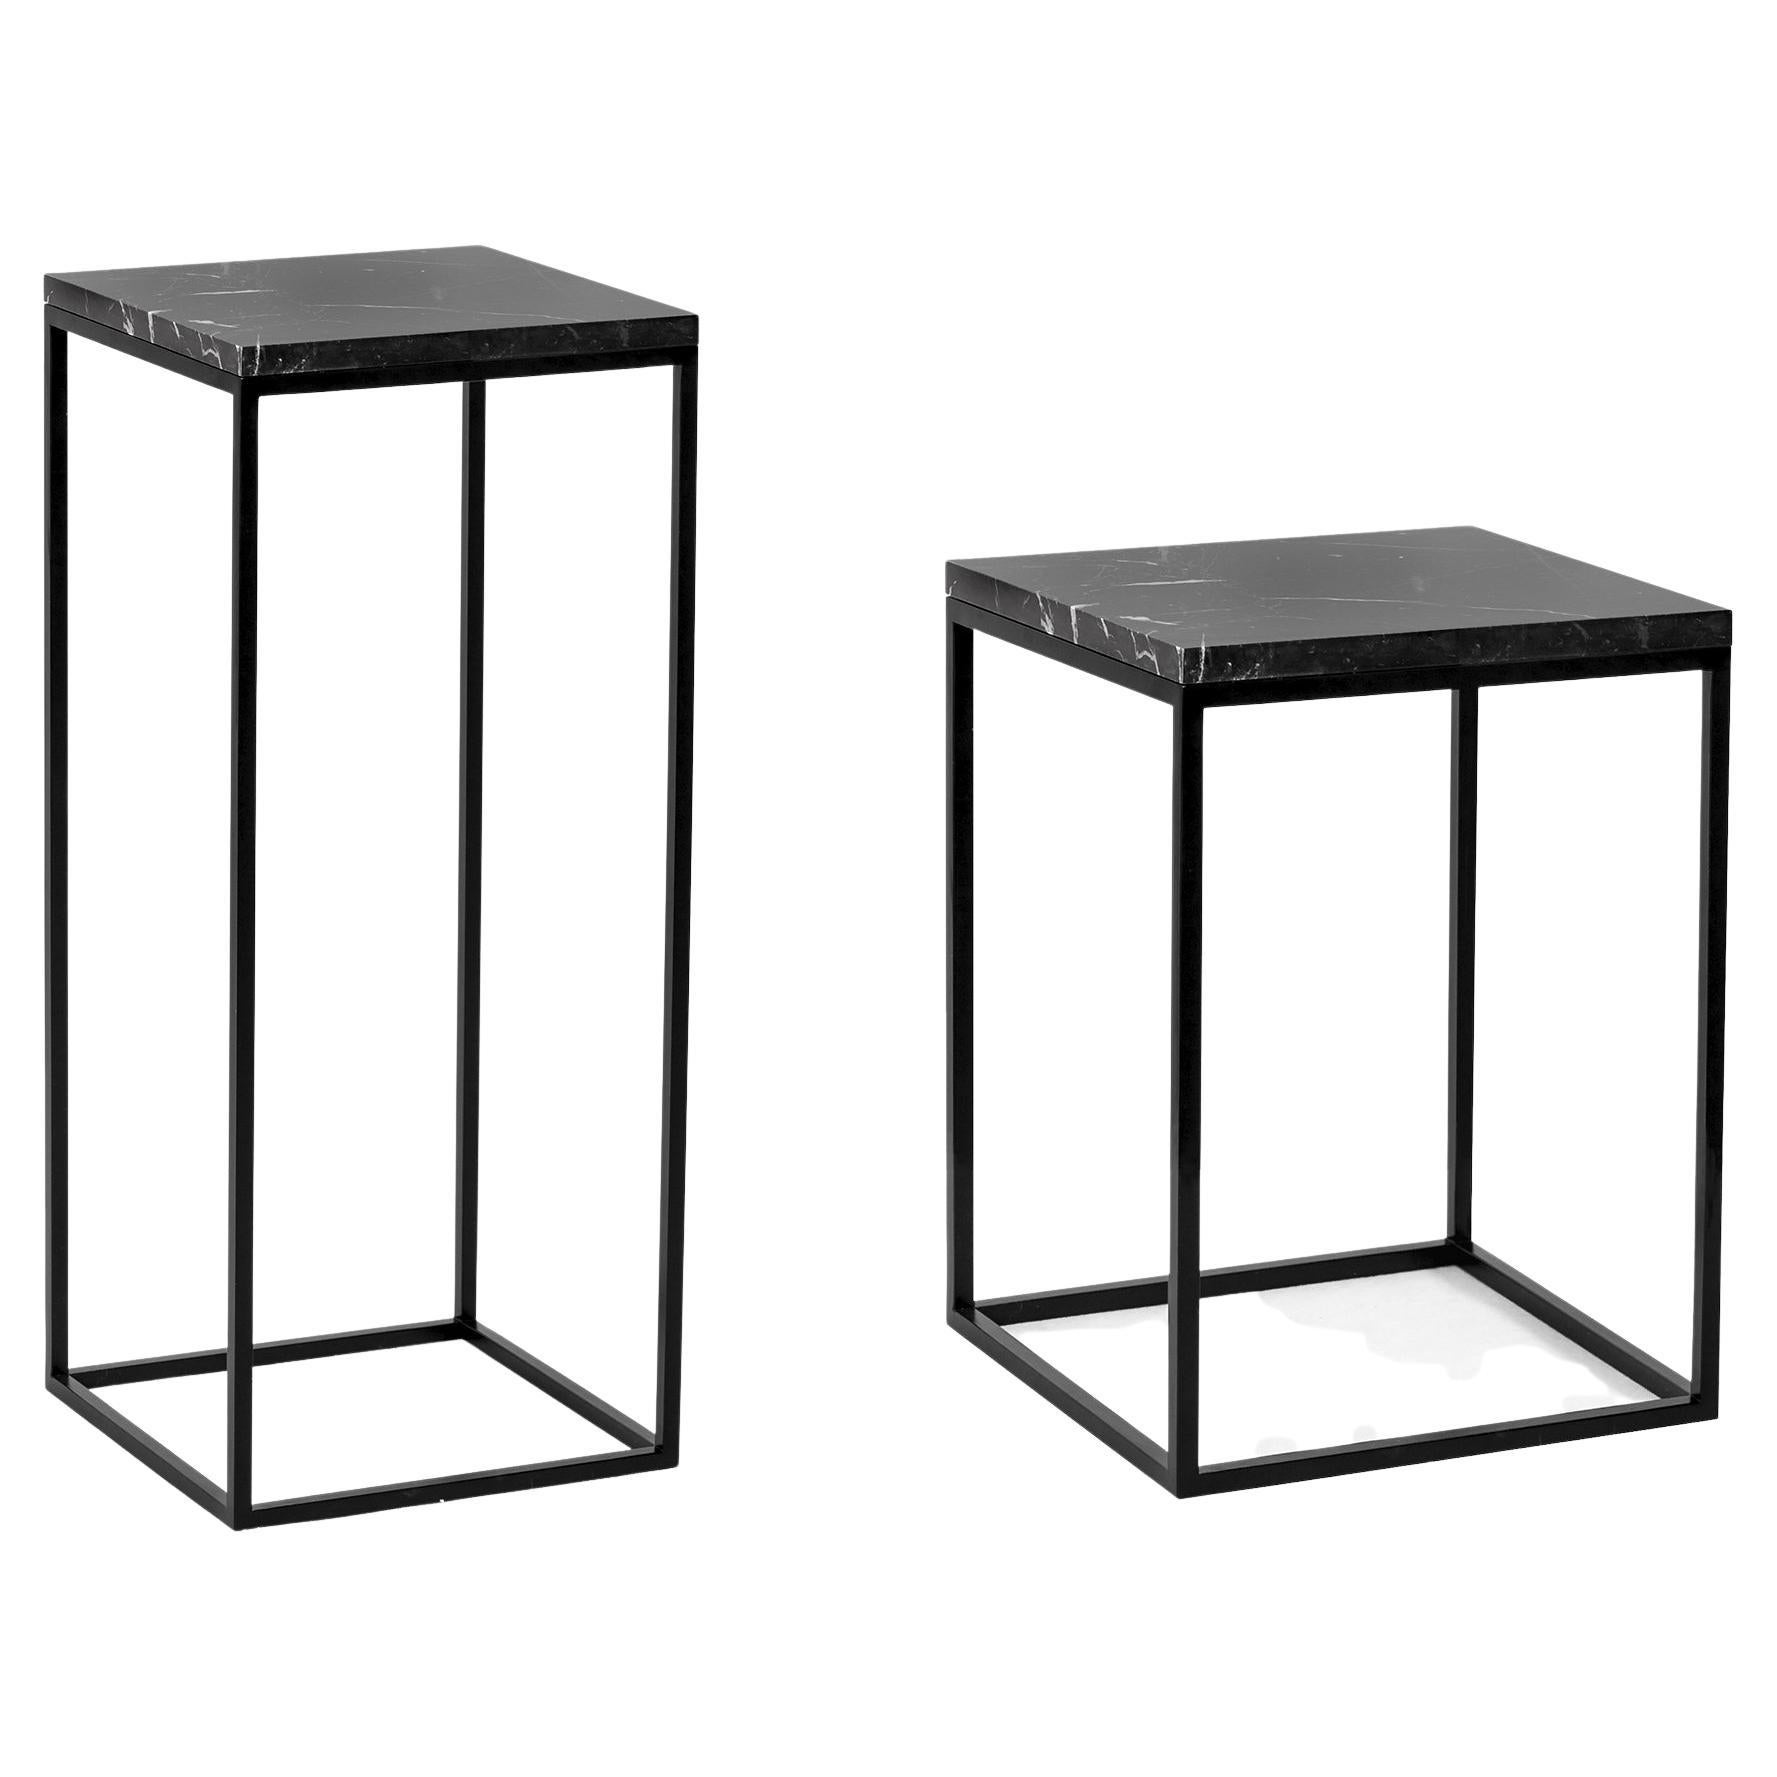 Set of 2 Small and Medium Pillar Side Tables by Un’common